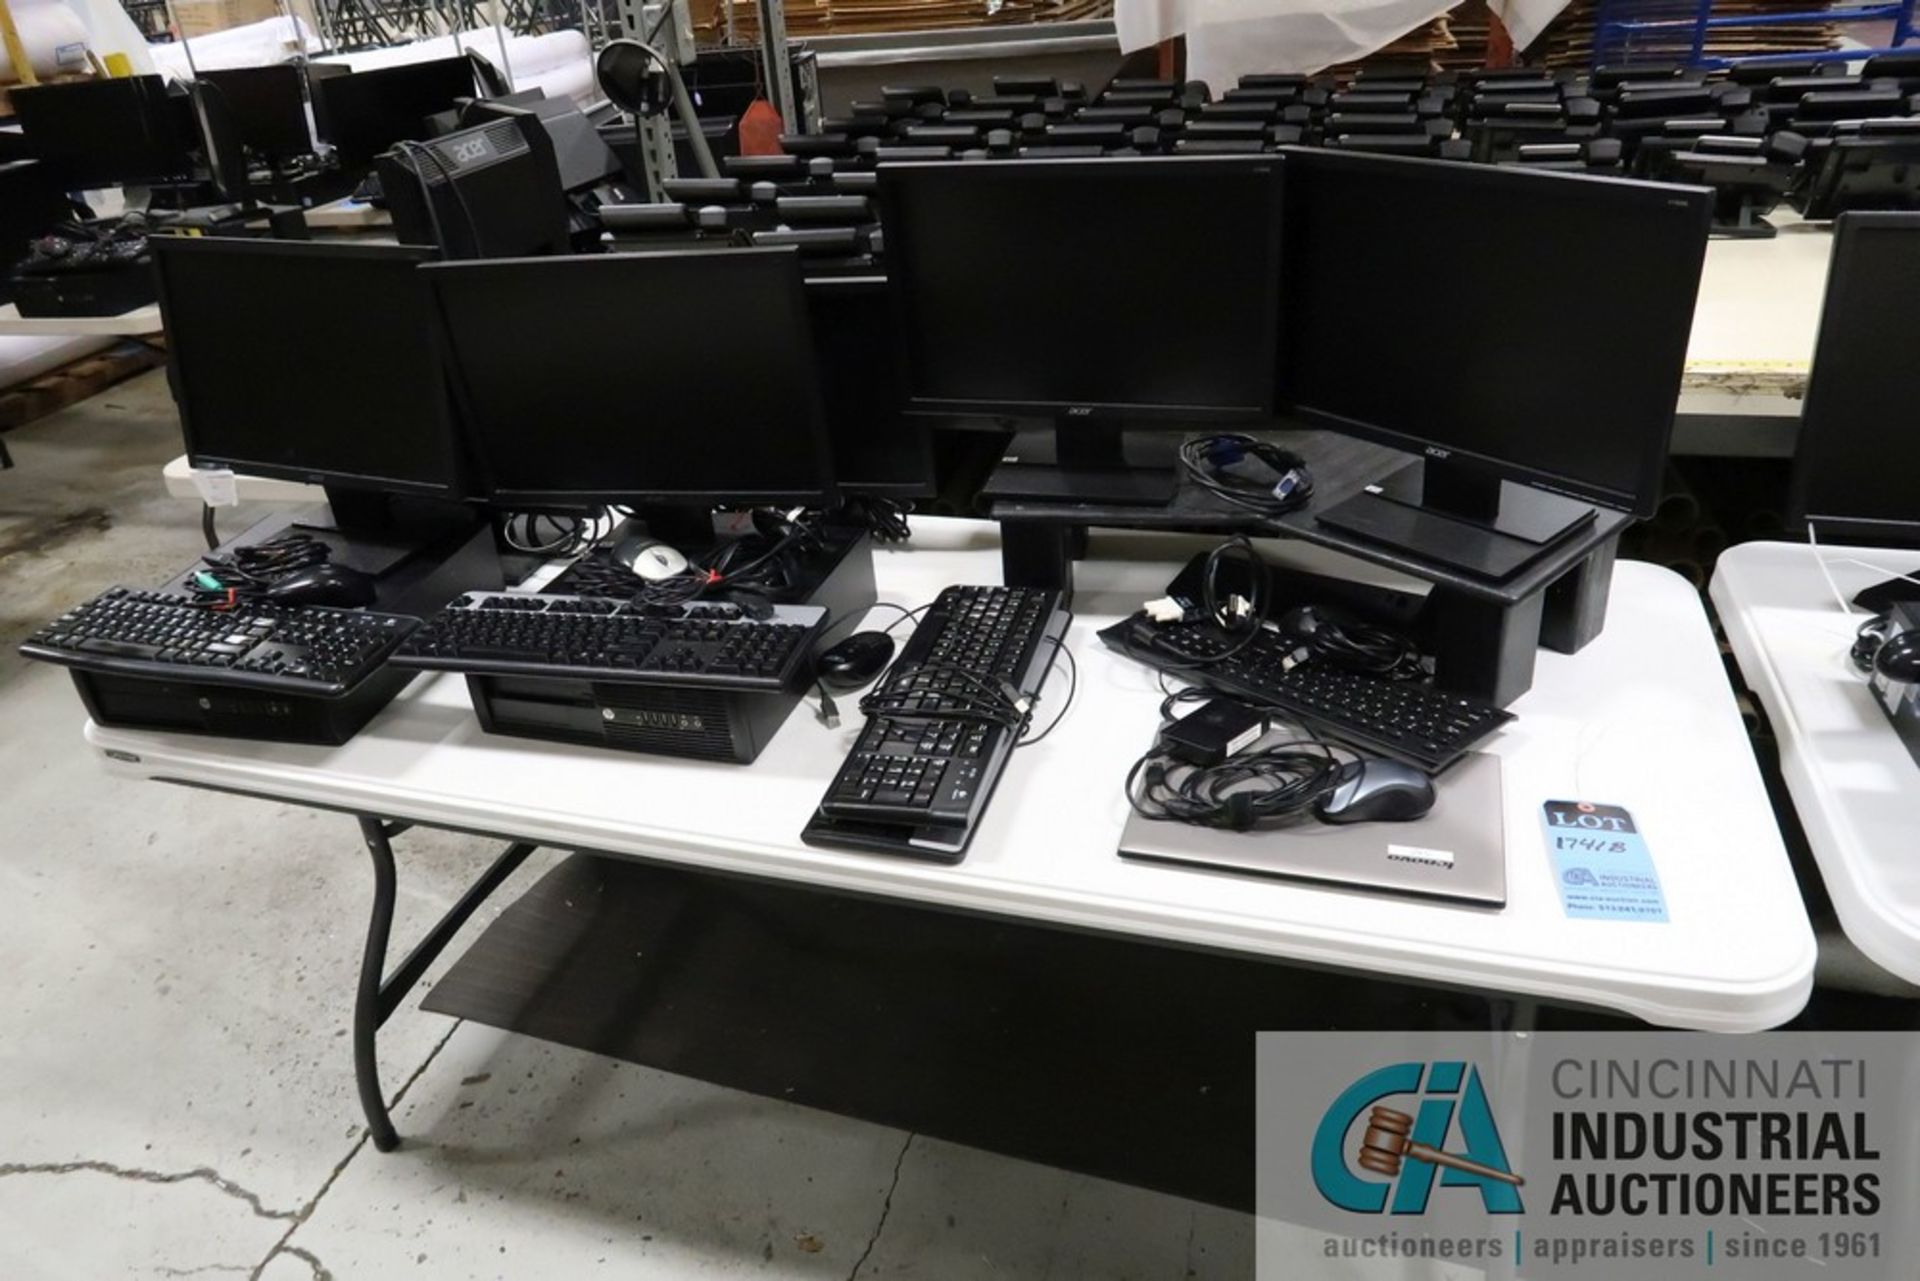 (LOT) MISCELLANEOUS COMPUTERS, MONITORS, KEYBOARDS, MICE